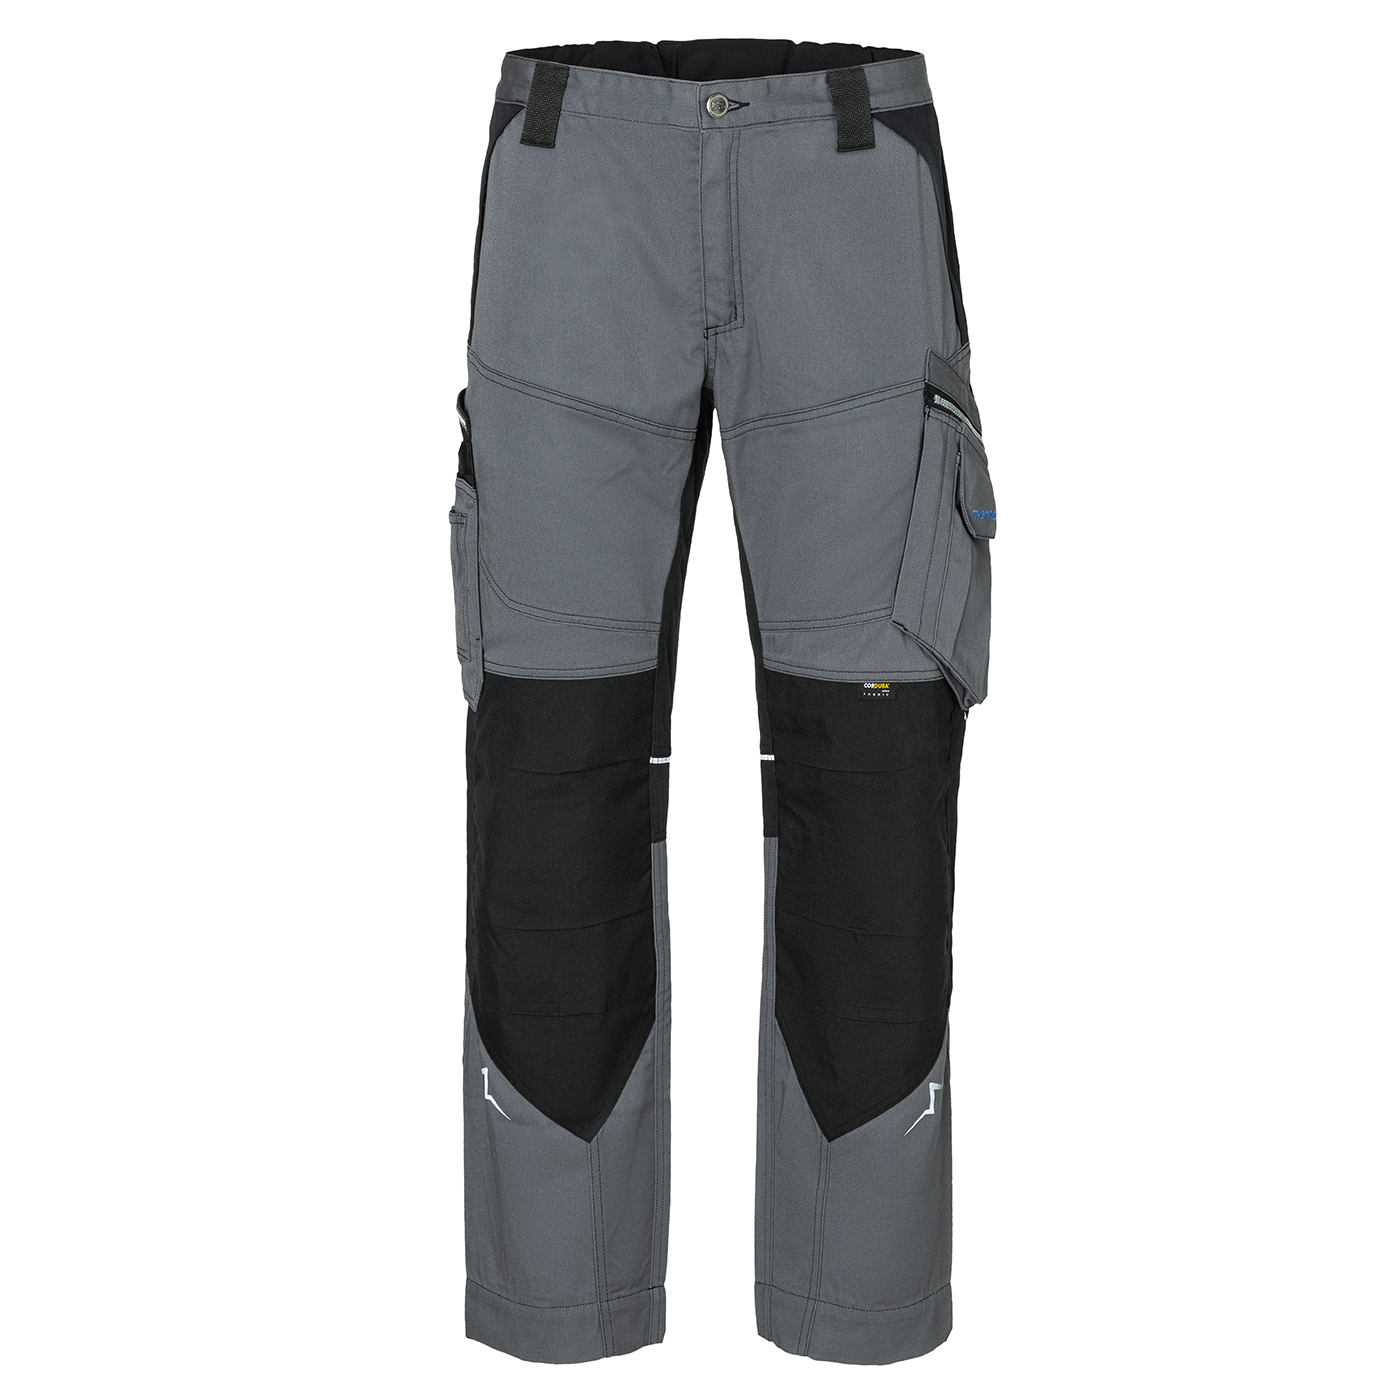 KÜBLER PULSE Thermo Trousers PPE 2